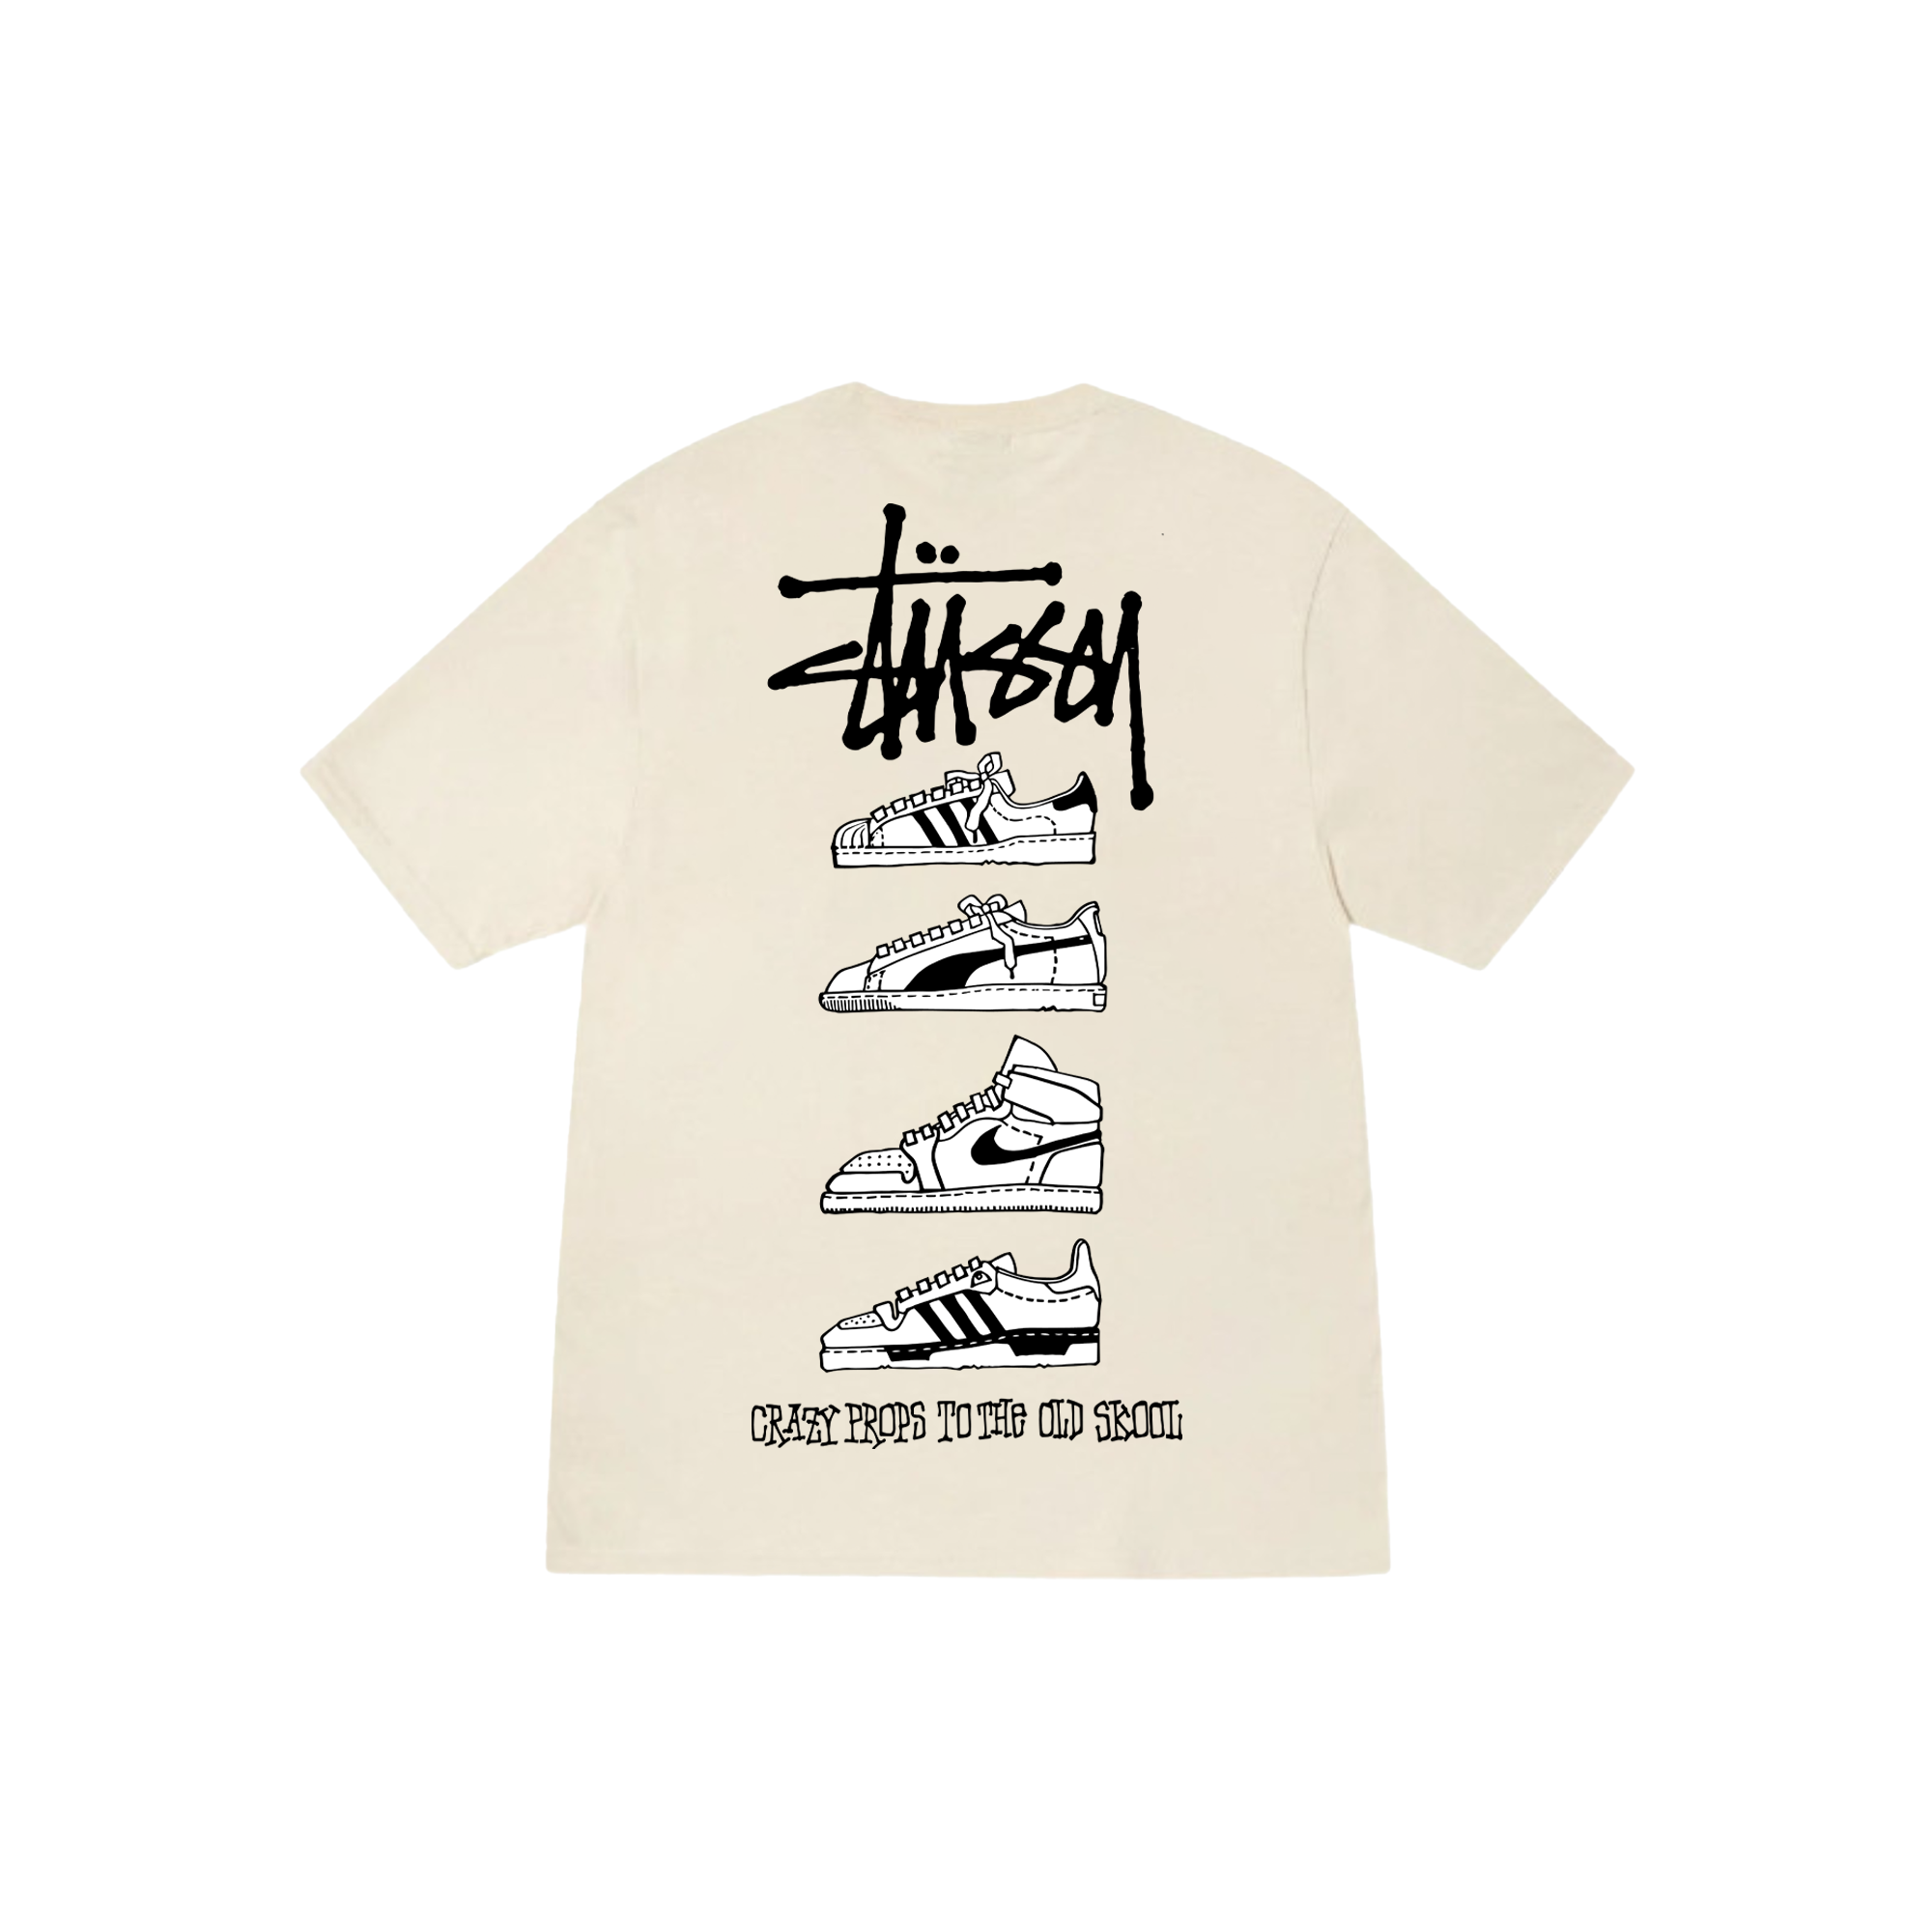 Stussy The Old School T-Shirt